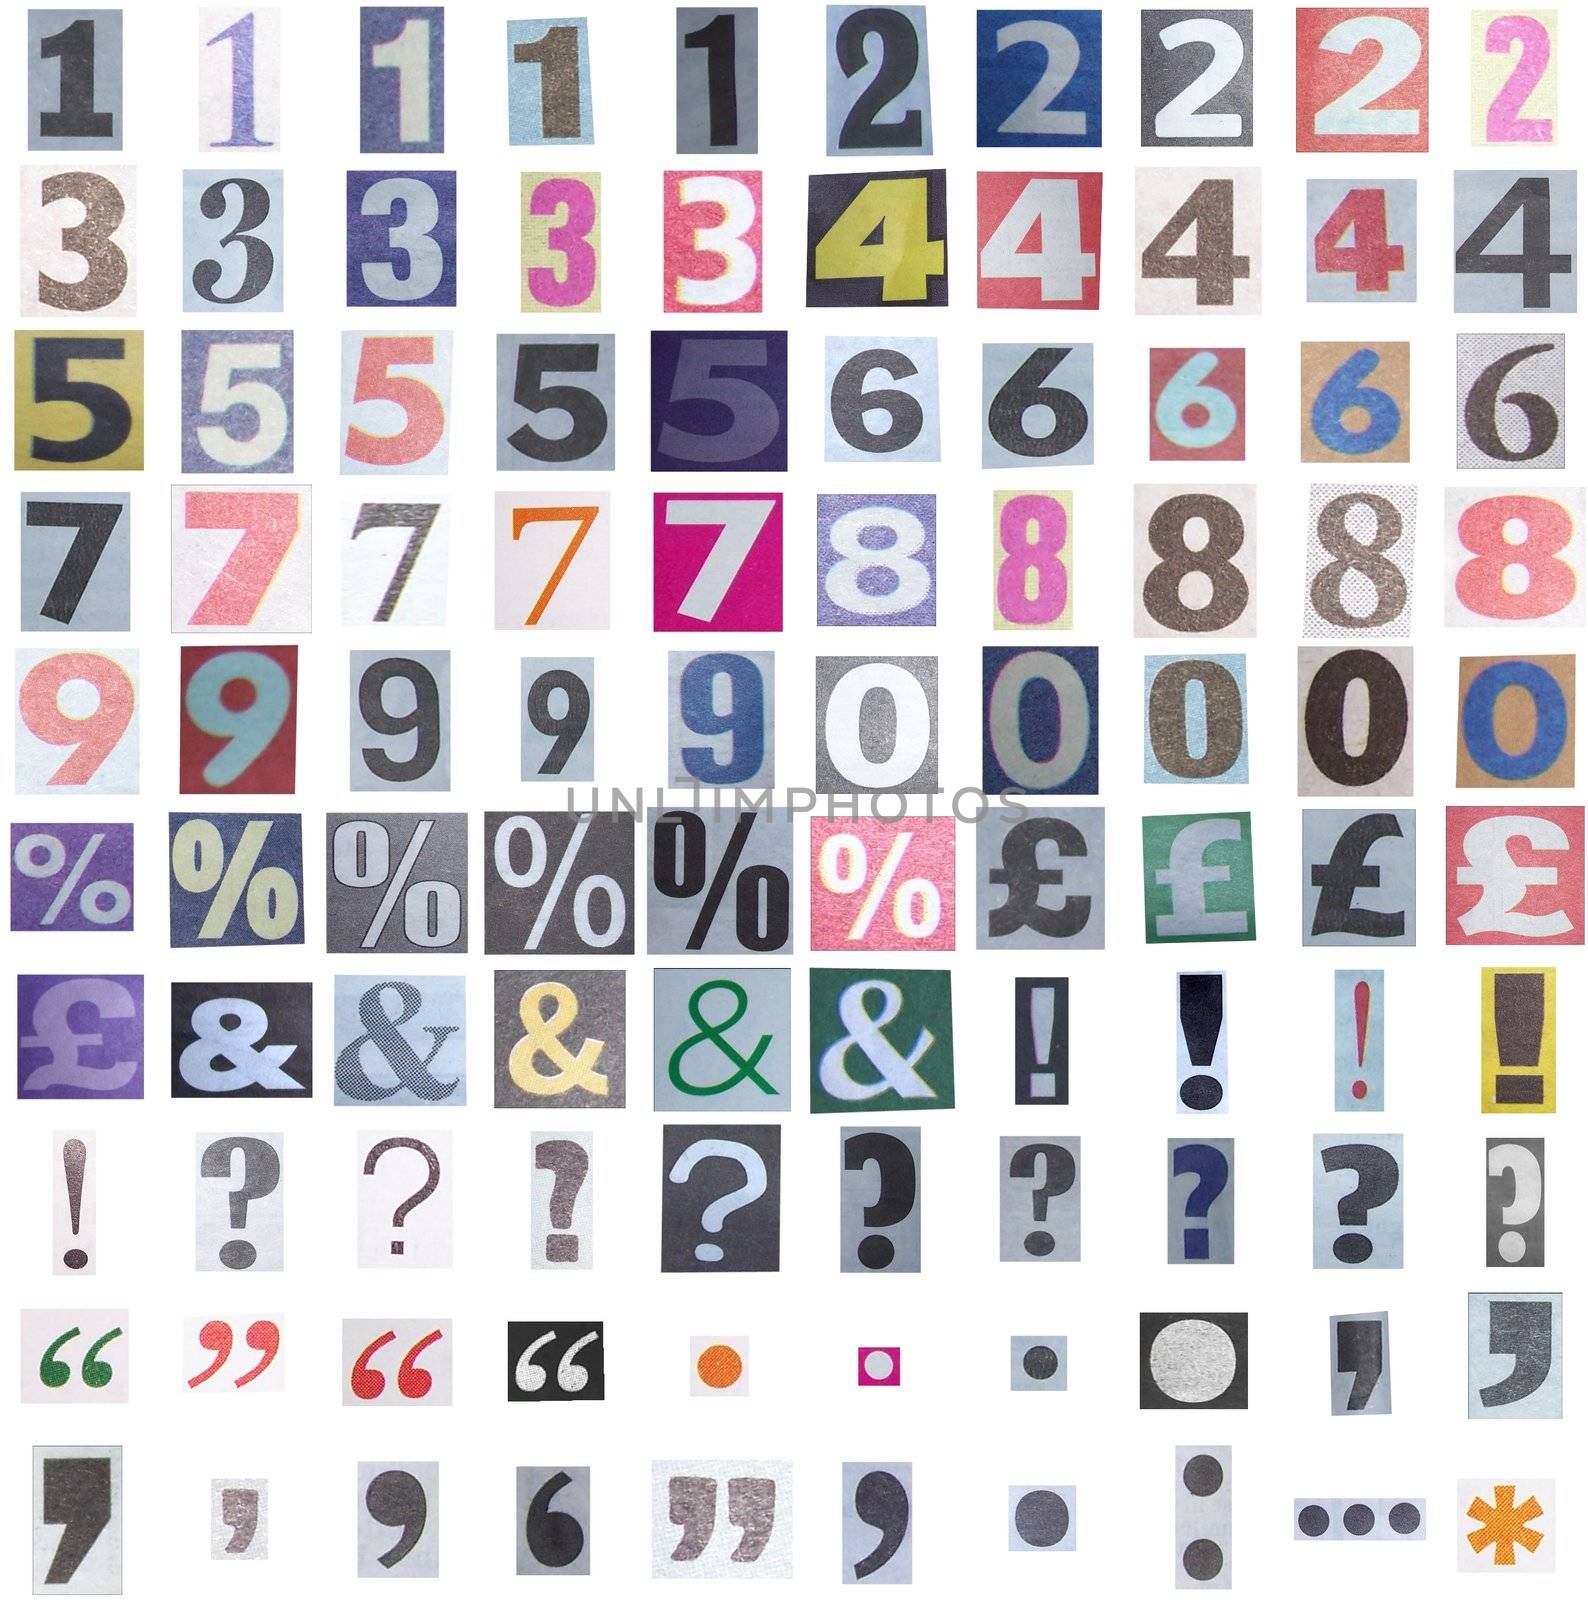 Newspaper symbols and numbers
